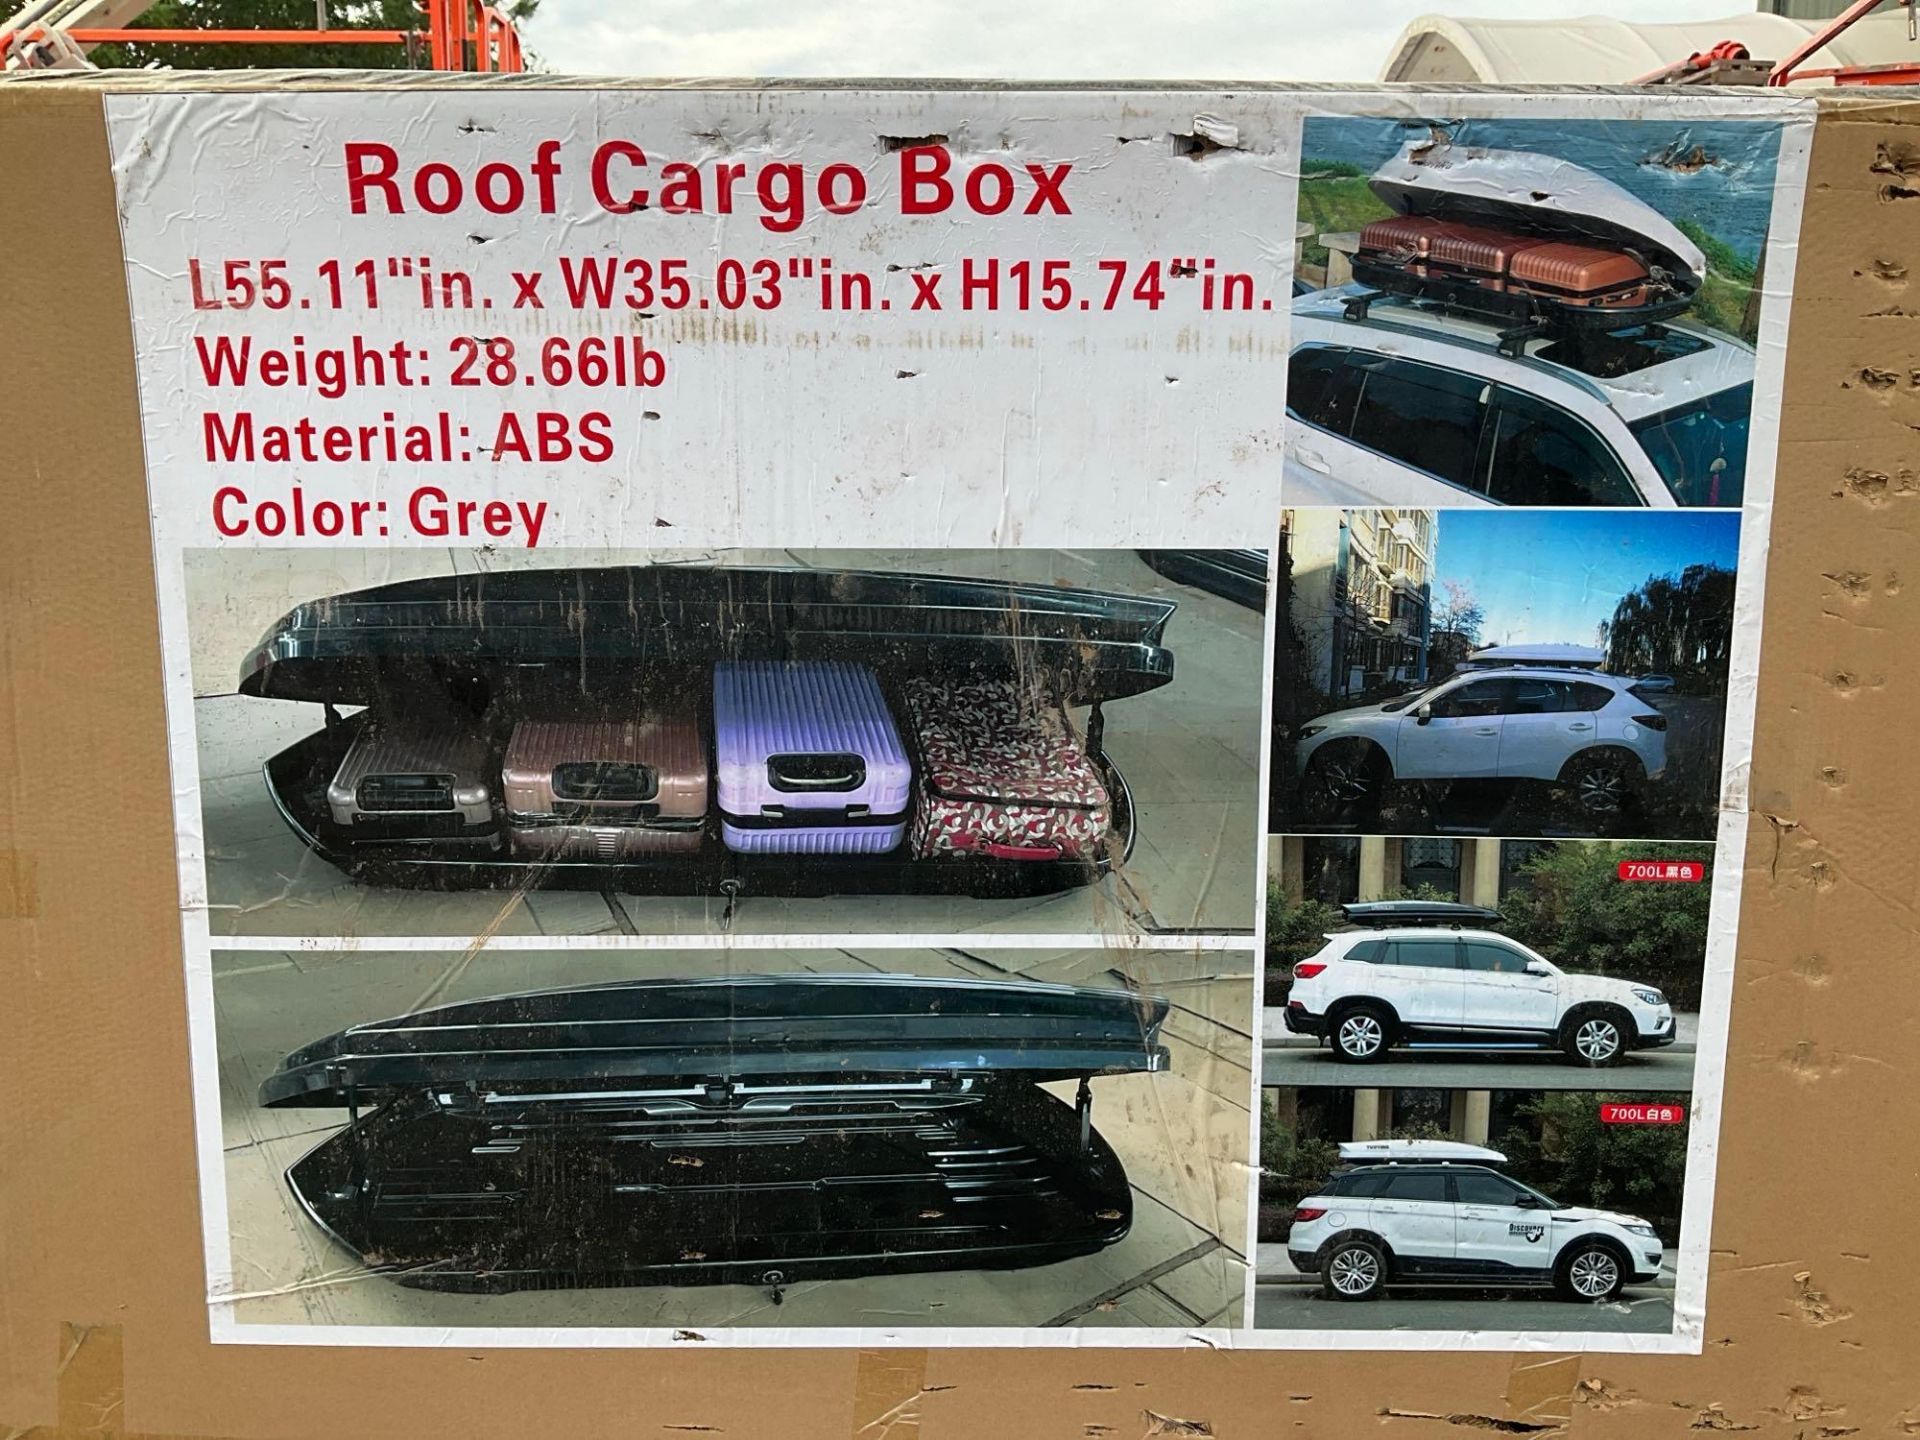 UNUSED ROOF CARGO BOX, APPROX 55.11" L x 35.03" W X 15.74" T, APPROX 1 IN BOX - Image 6 of 6